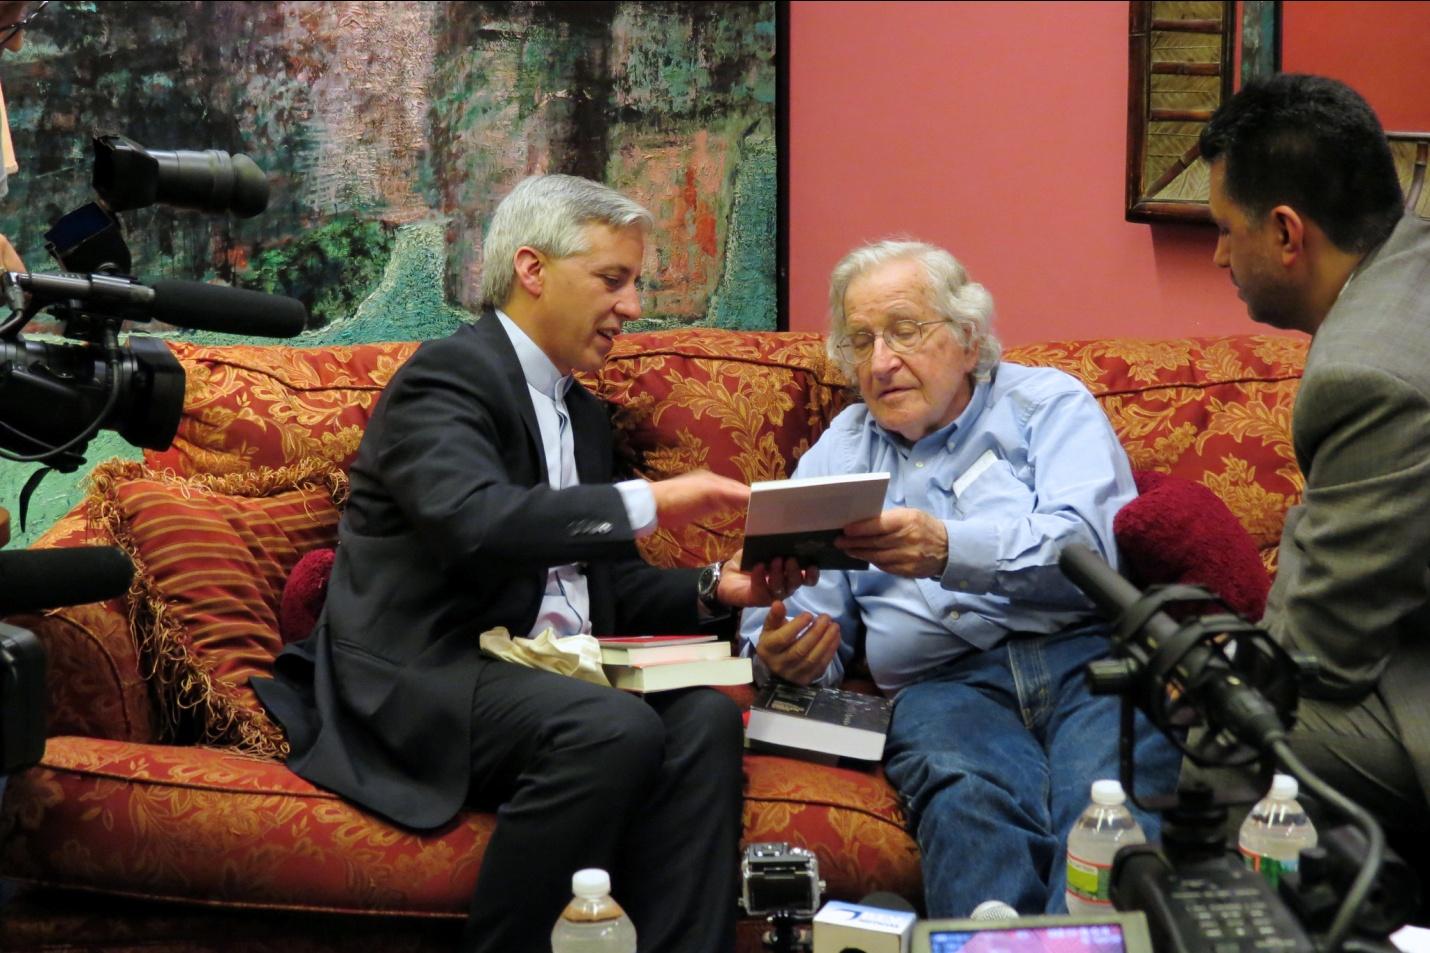 Noam Chomsky in conversation with Bolivian Vice President